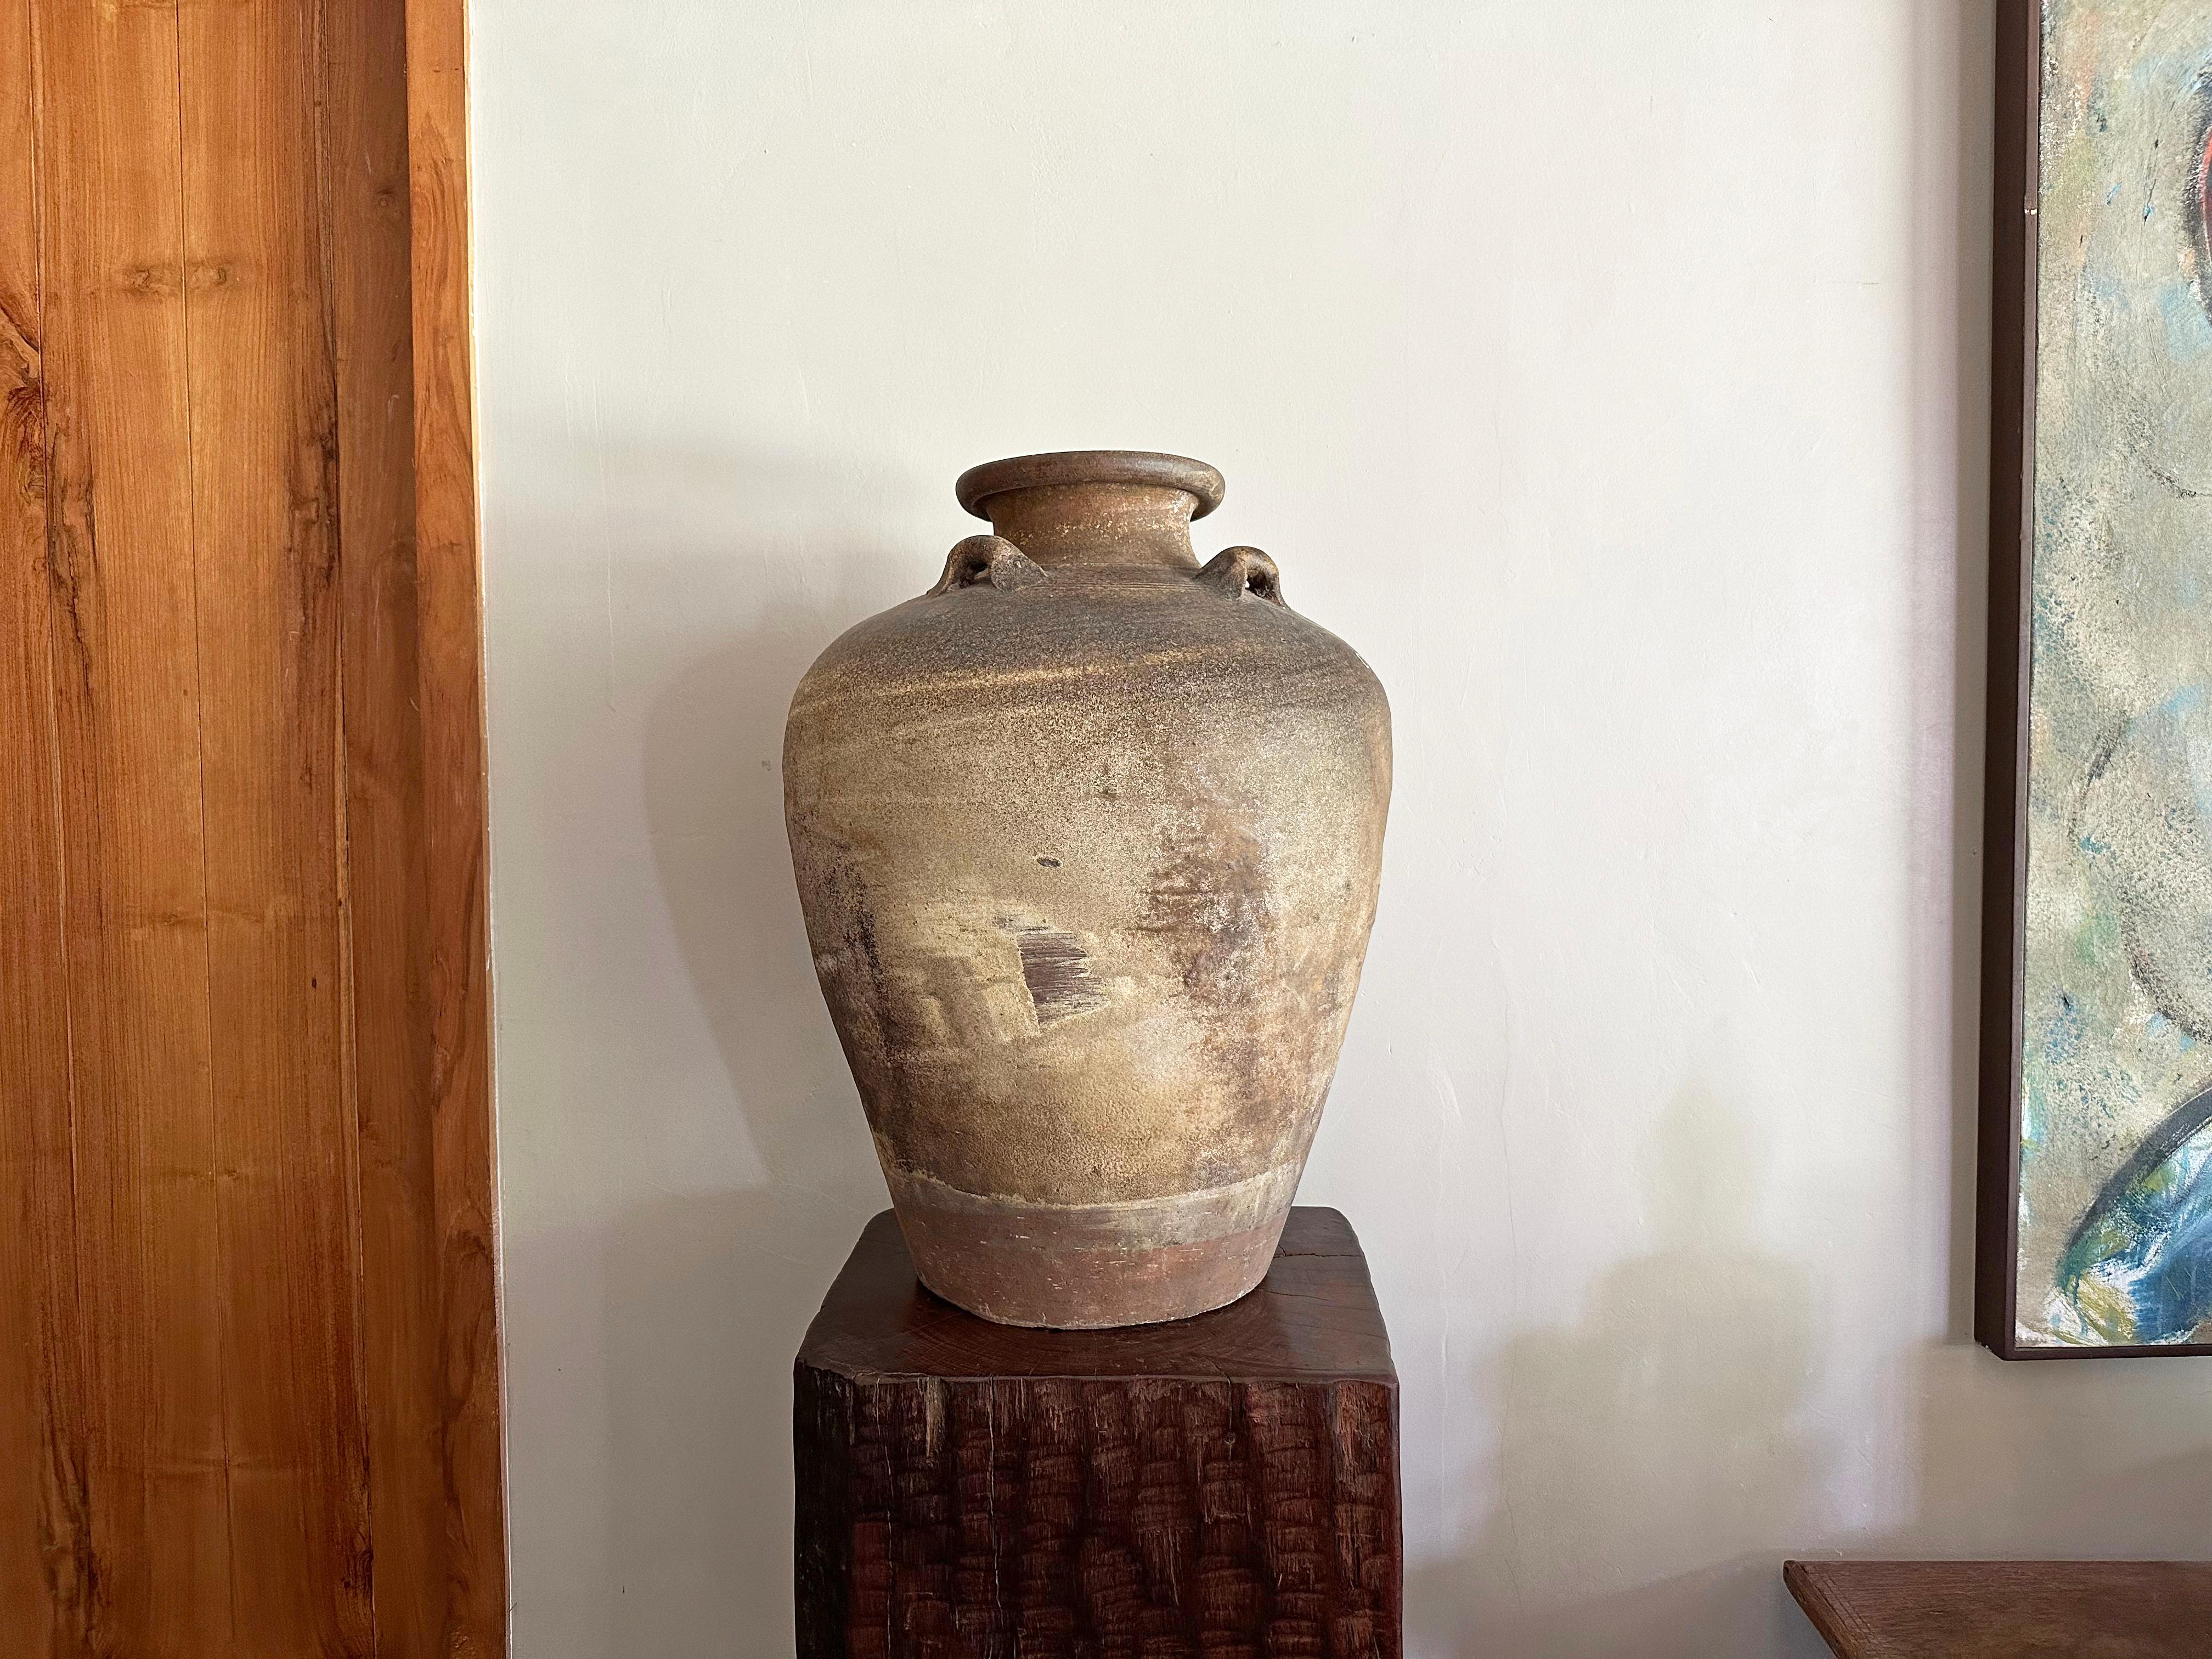 A wonderful example of a 16th century Sawankhalok jar from a Shipwreck off the Coast of the Indonesian Island of Batam. Batam was one of the most substantial and influential ports in the South China Sea where an abundance of trade was conducted. The